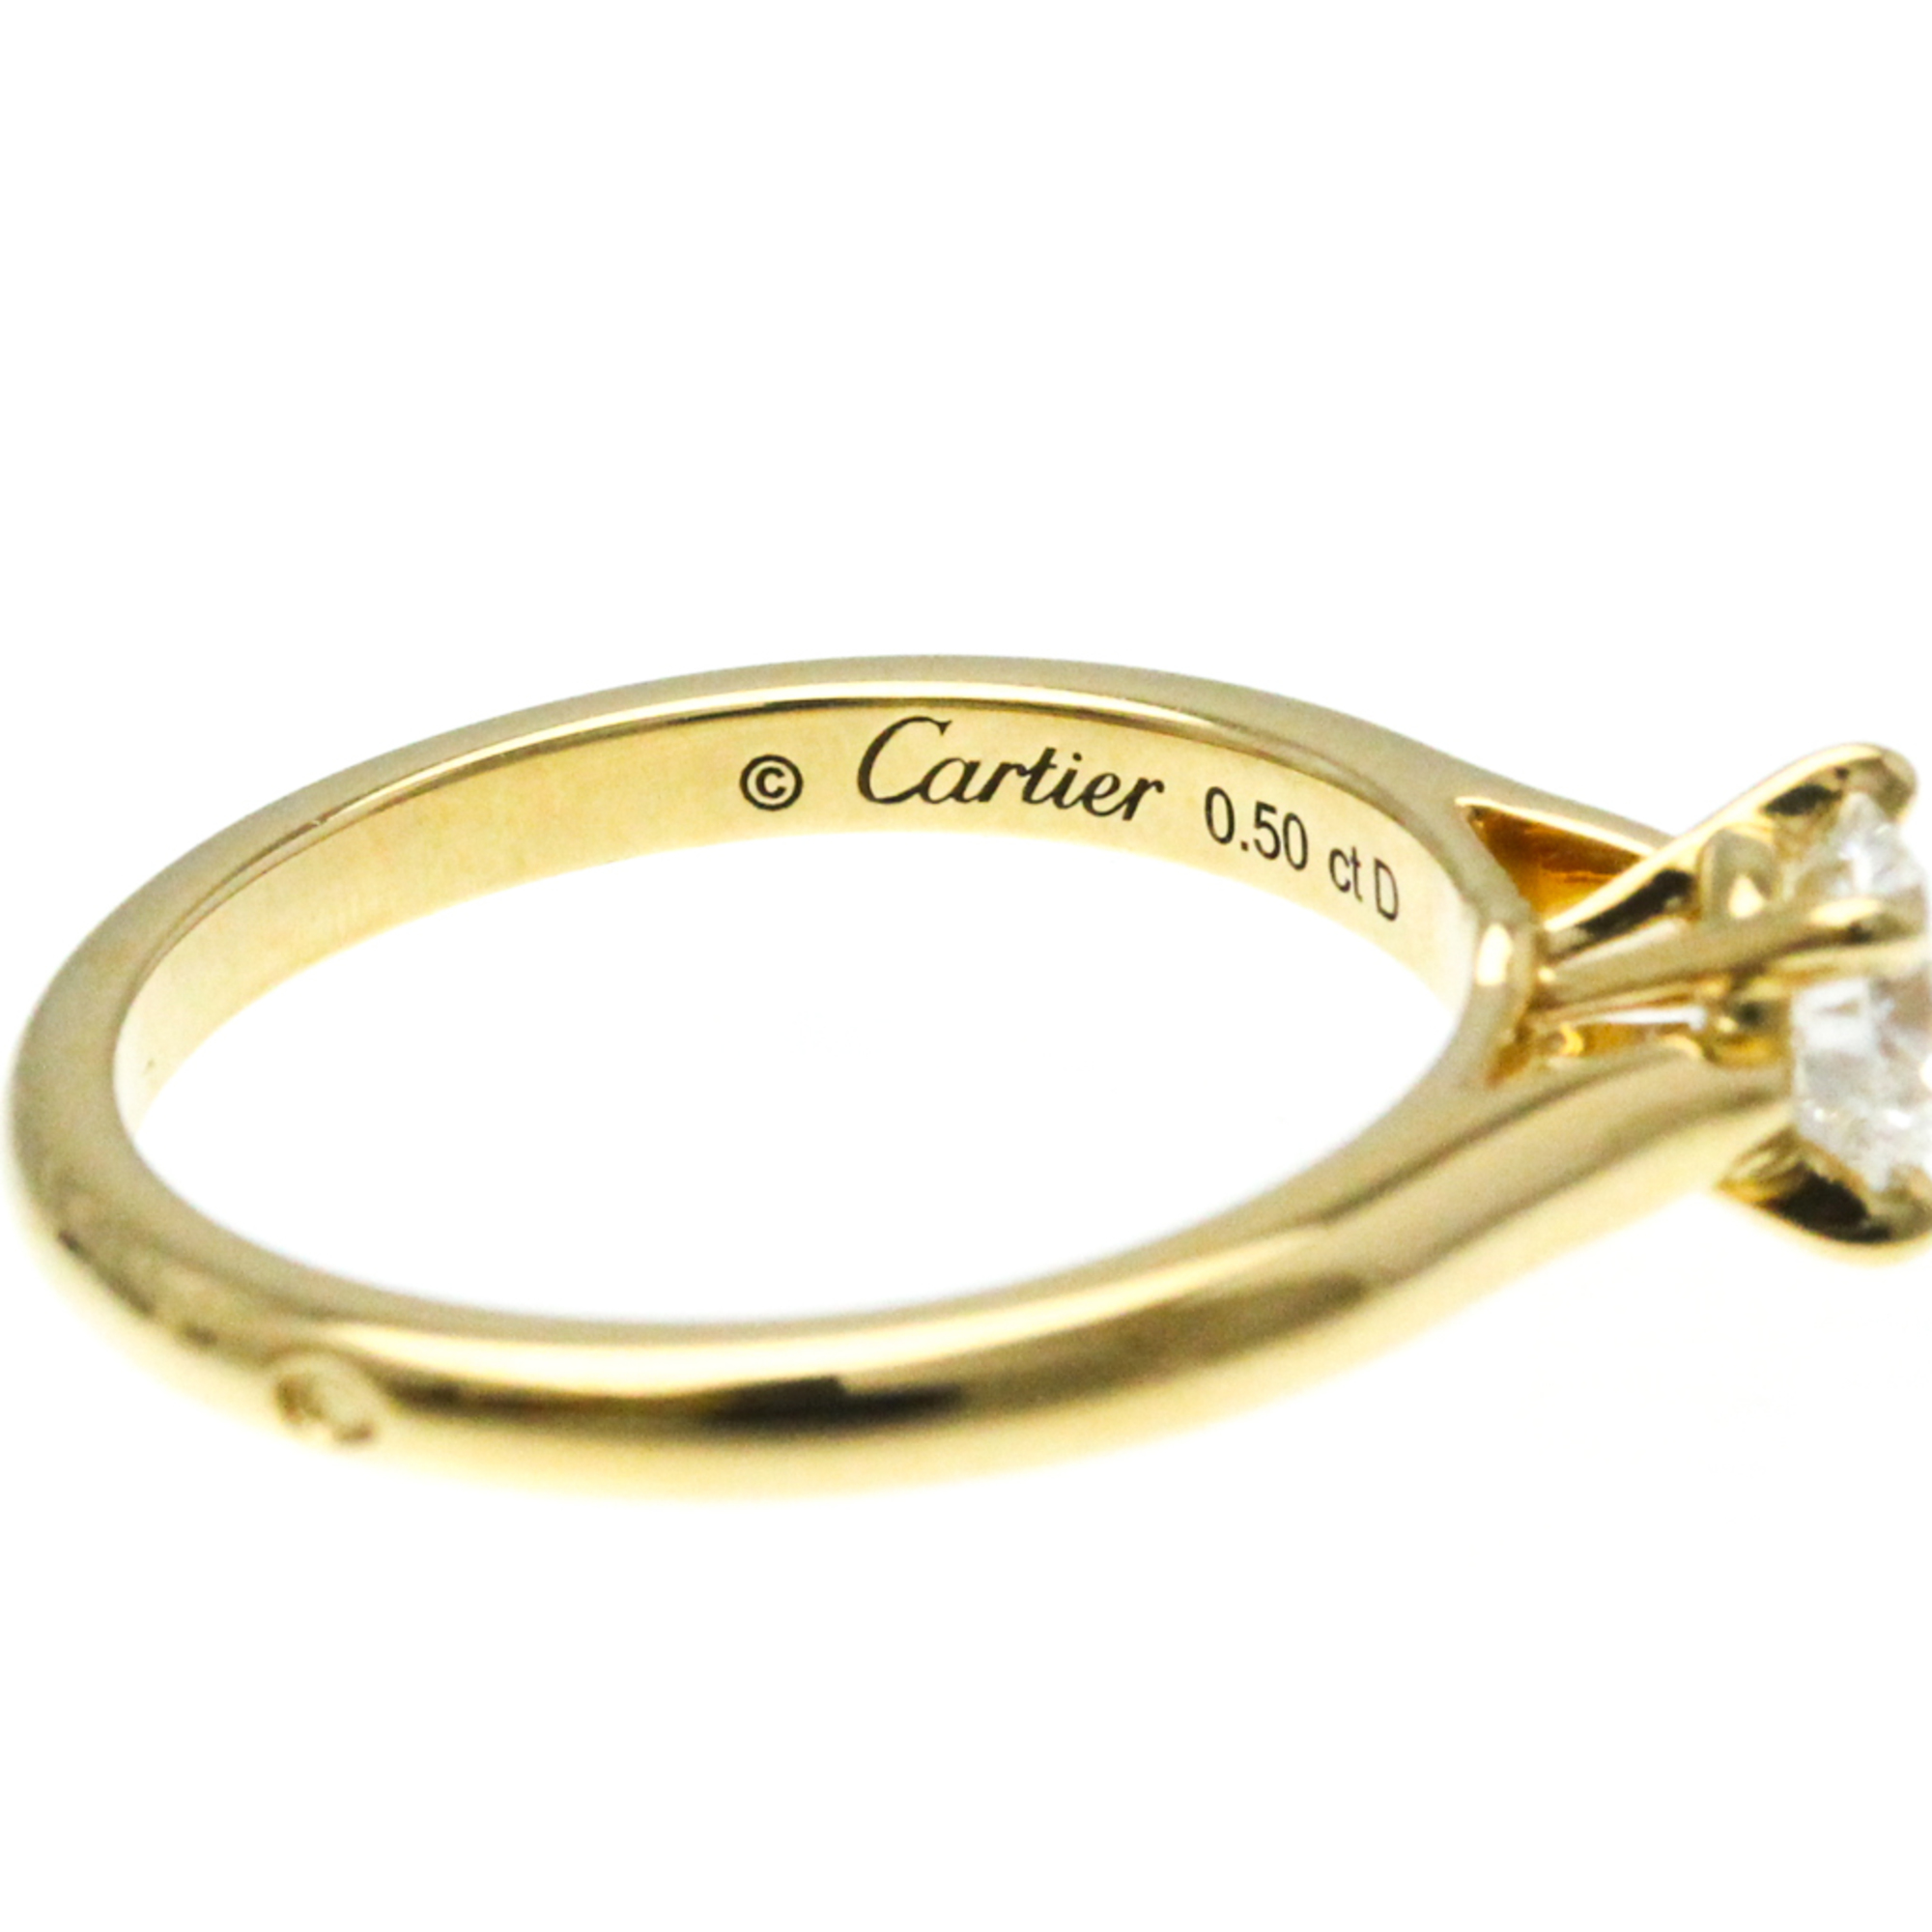 Cartier 1895 Solitaire Ring Yellow Gold (18K) Fashion Diamond Engagement Ring Carat/0.5 Gold